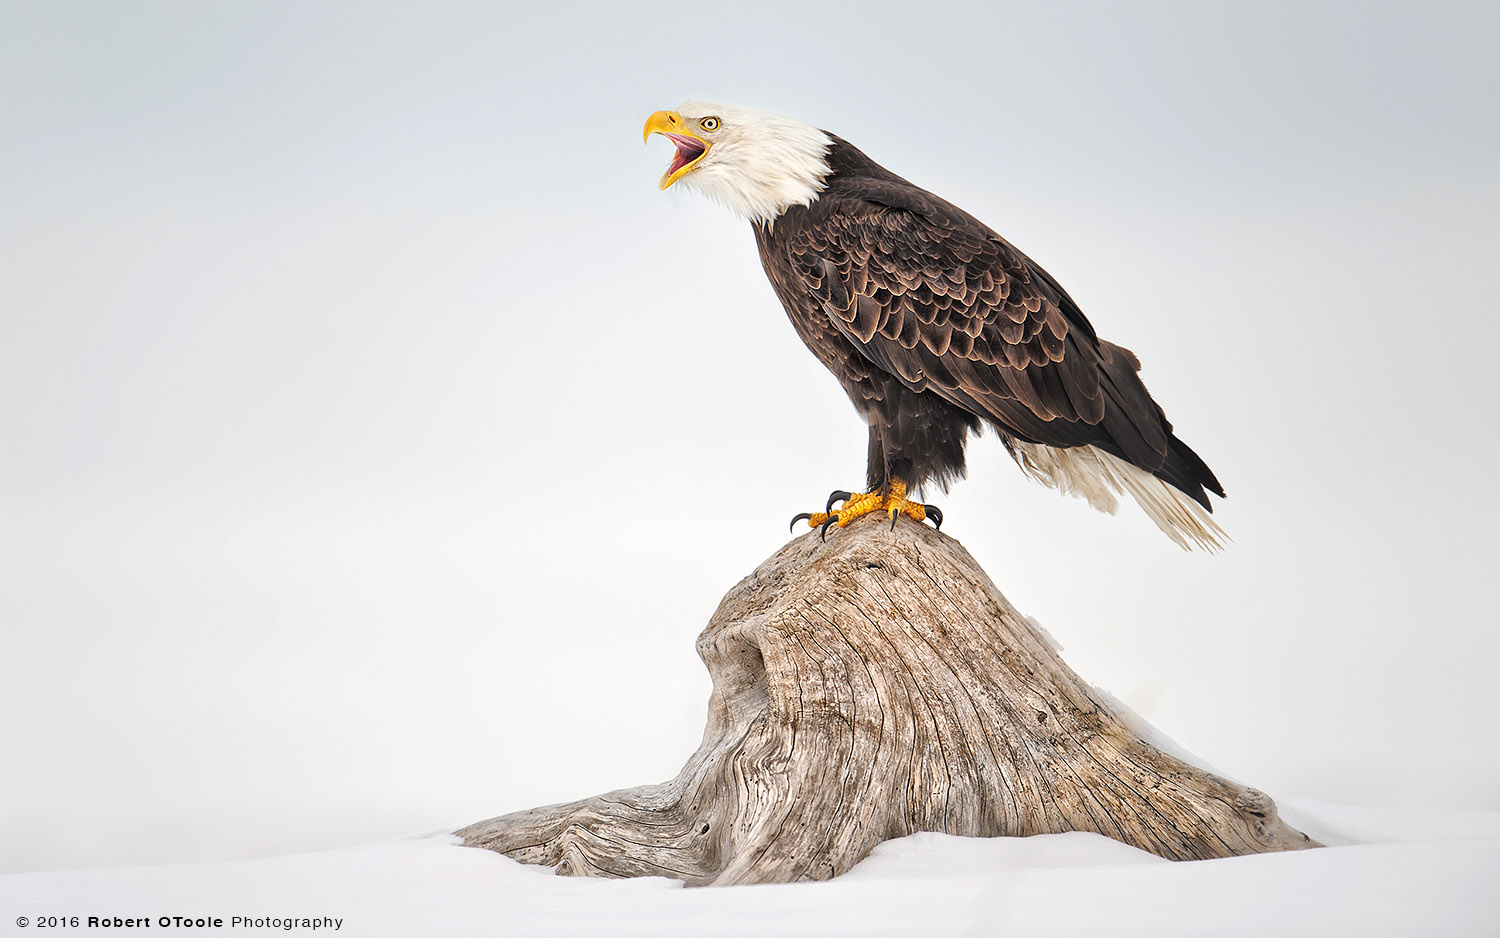 Perched Bald Eagle Calling with Snow Background